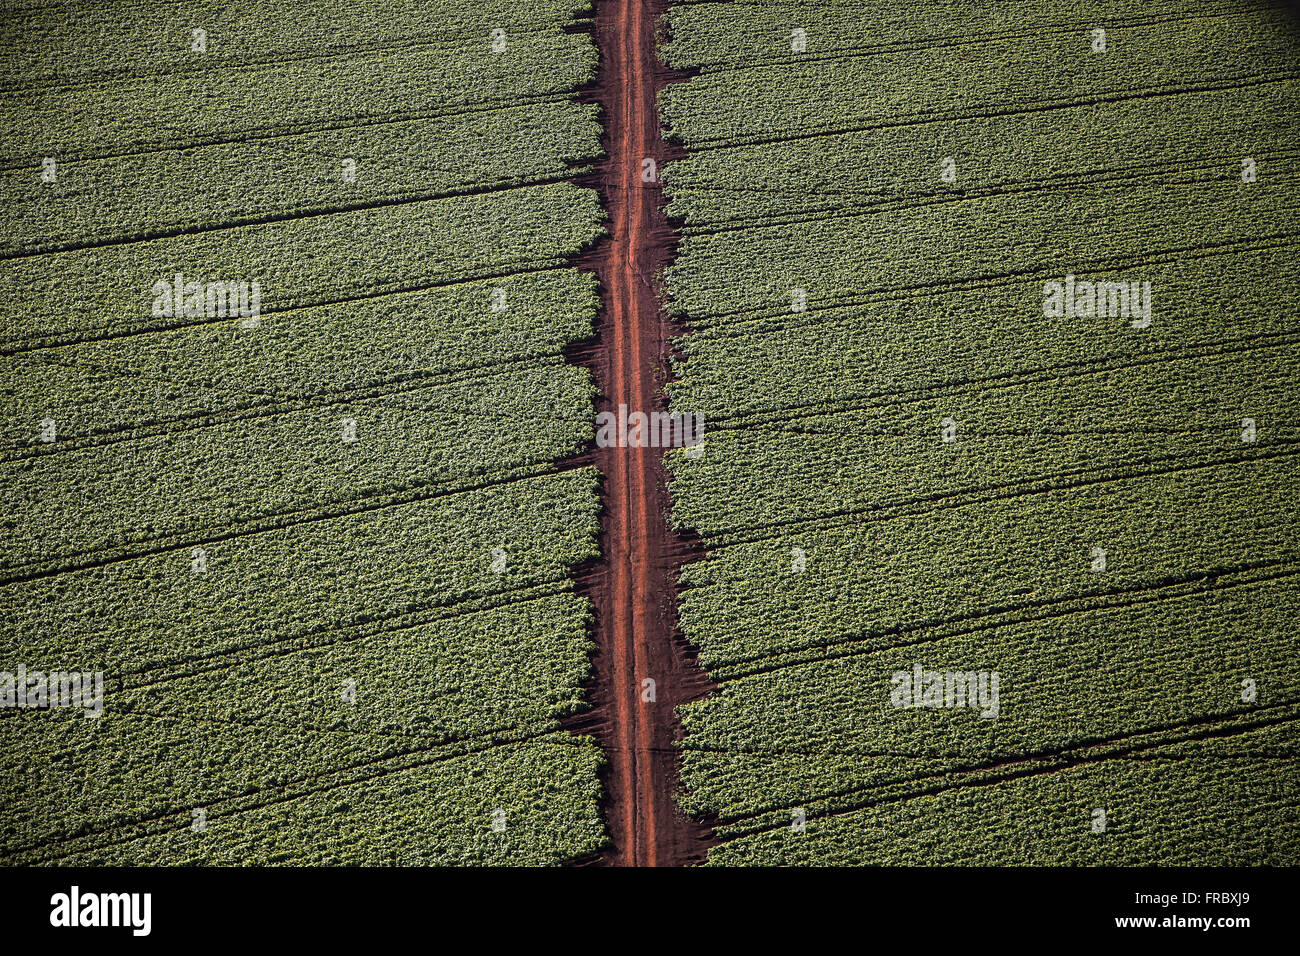 Aerial view of soy plantation in the countryside Stock Photo